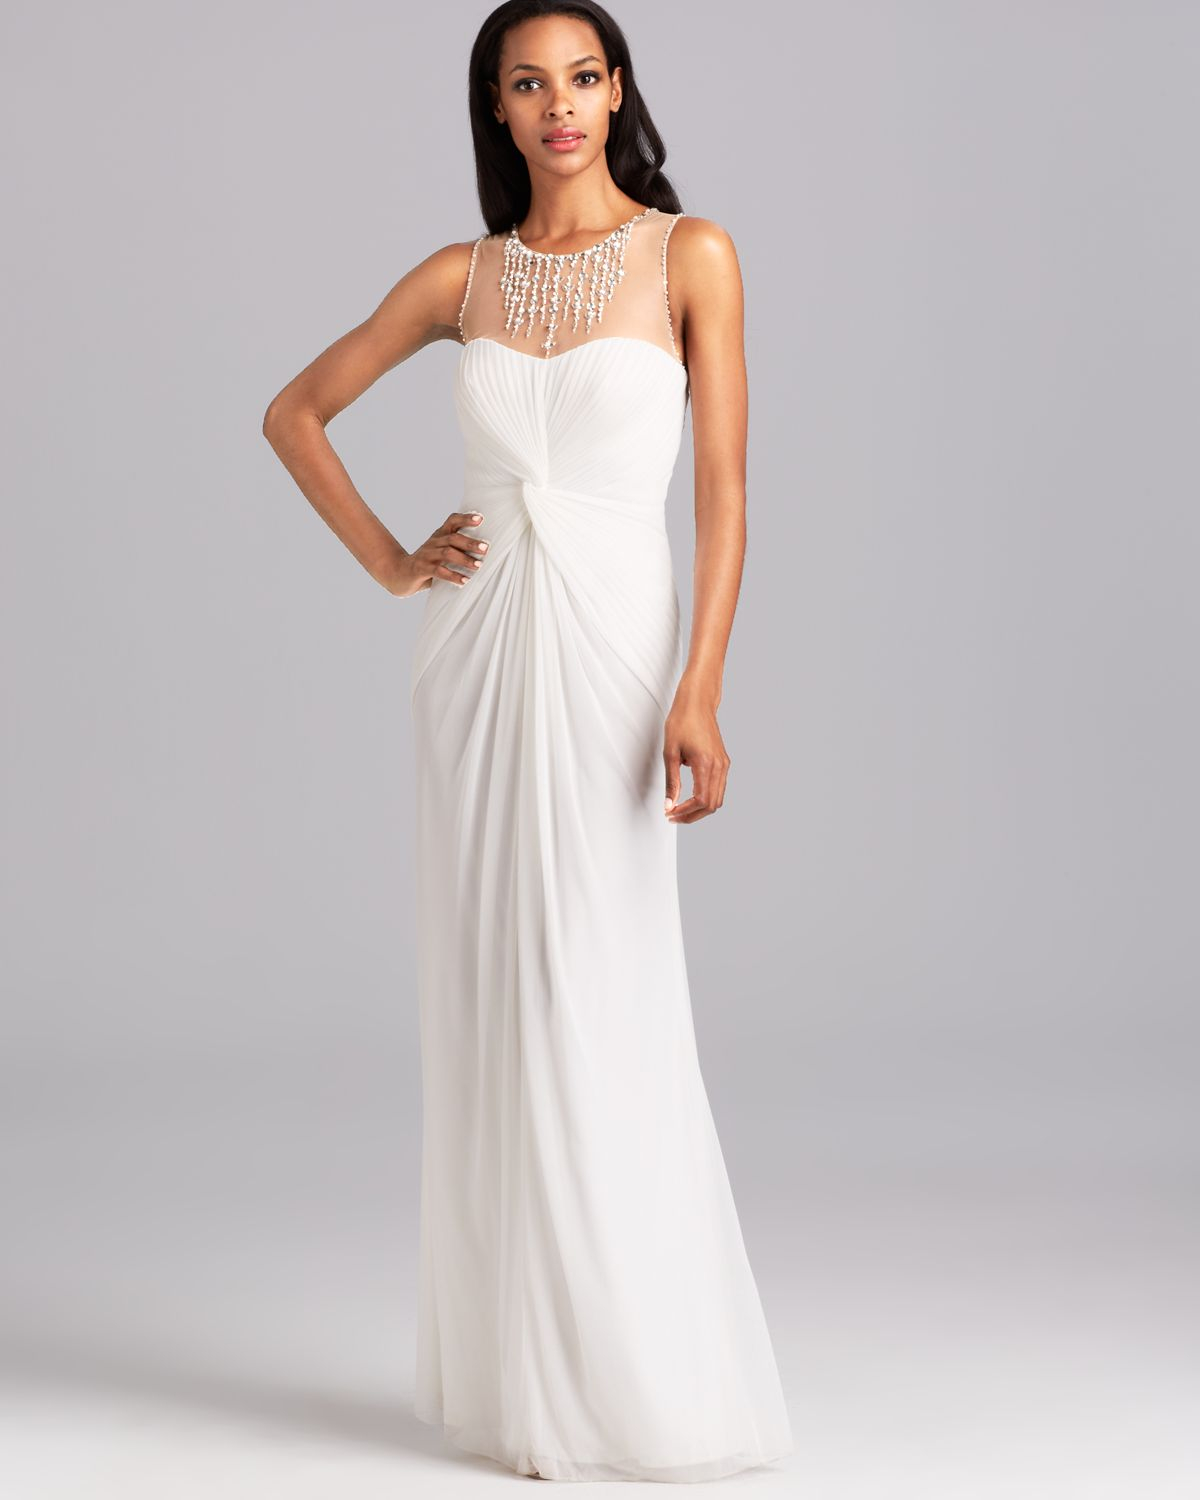 Lyst - Adrianna Papell Sleeveless Necklace Gown in Natural